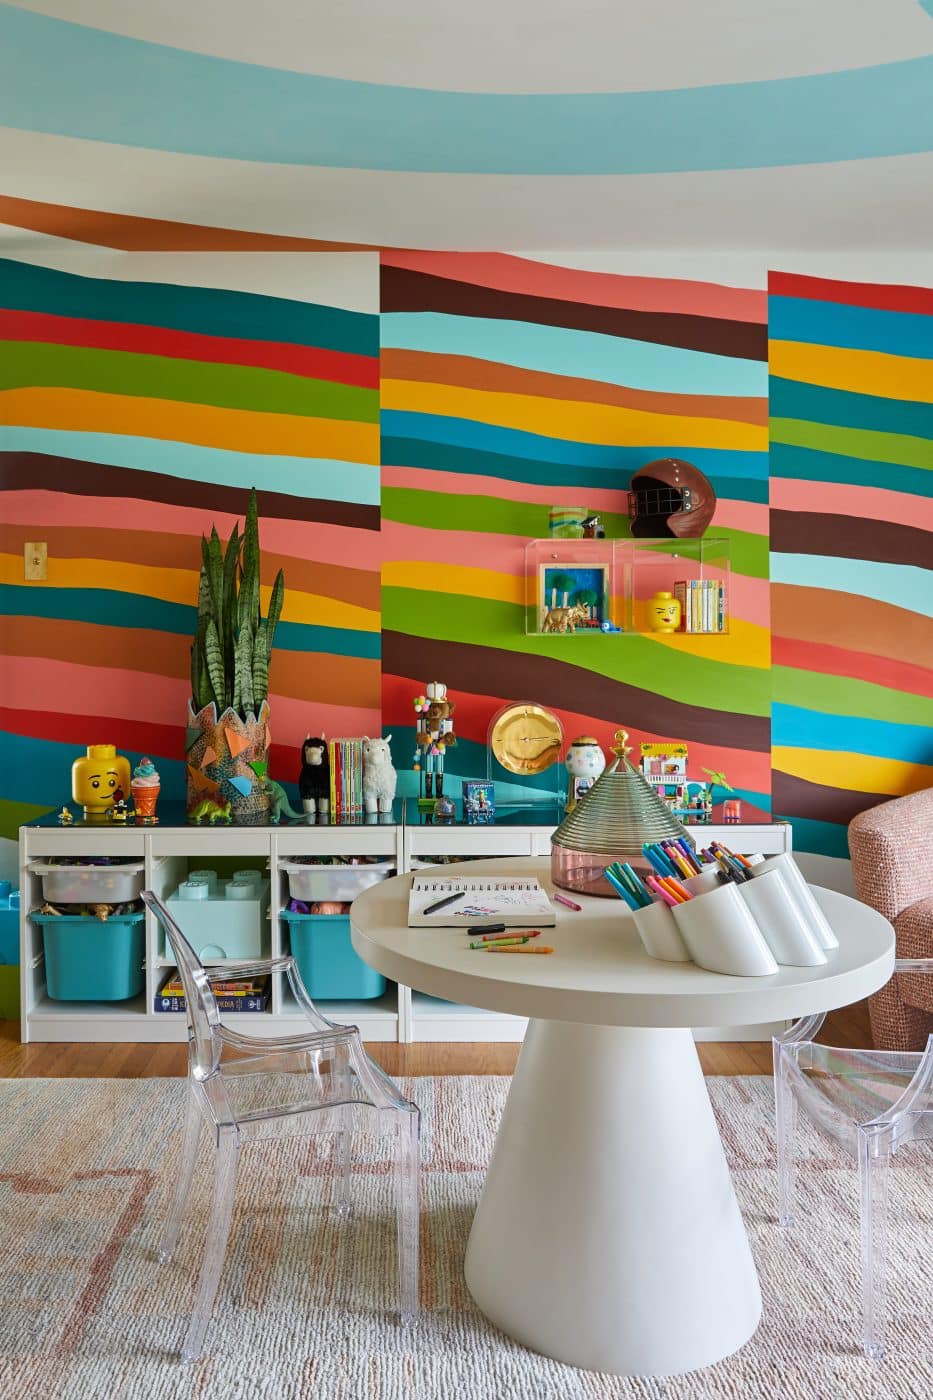 Striped Brooklyn children's bedroom designed by JDK Interiors